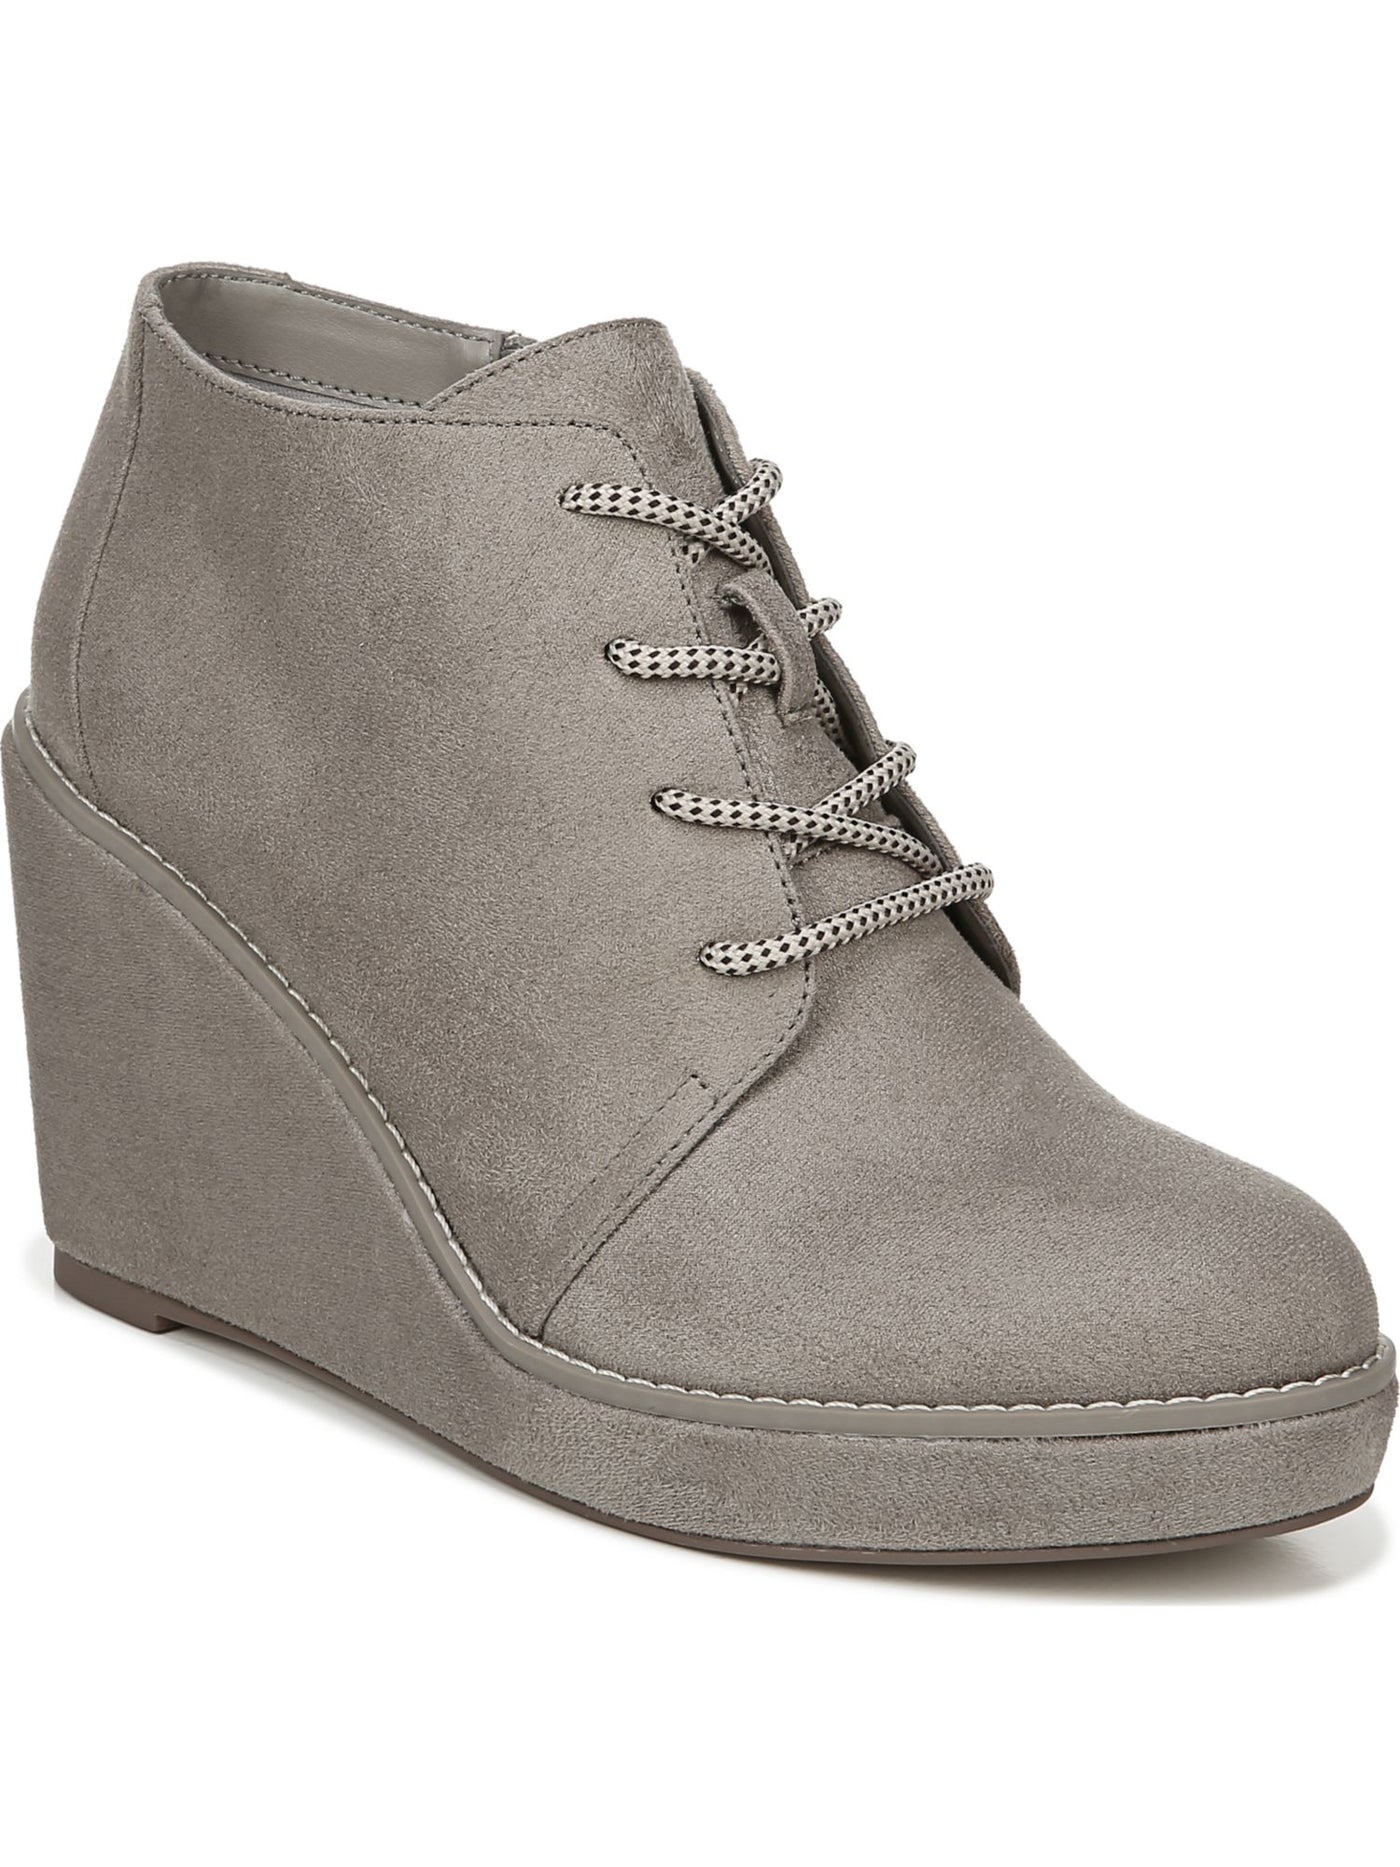 CARLOS BY CARLOS SANTANA Womens Gray Lace Up Closure Cold Weather Wills Almond Toe Wedge Zip-Up Shootie 9.5 M